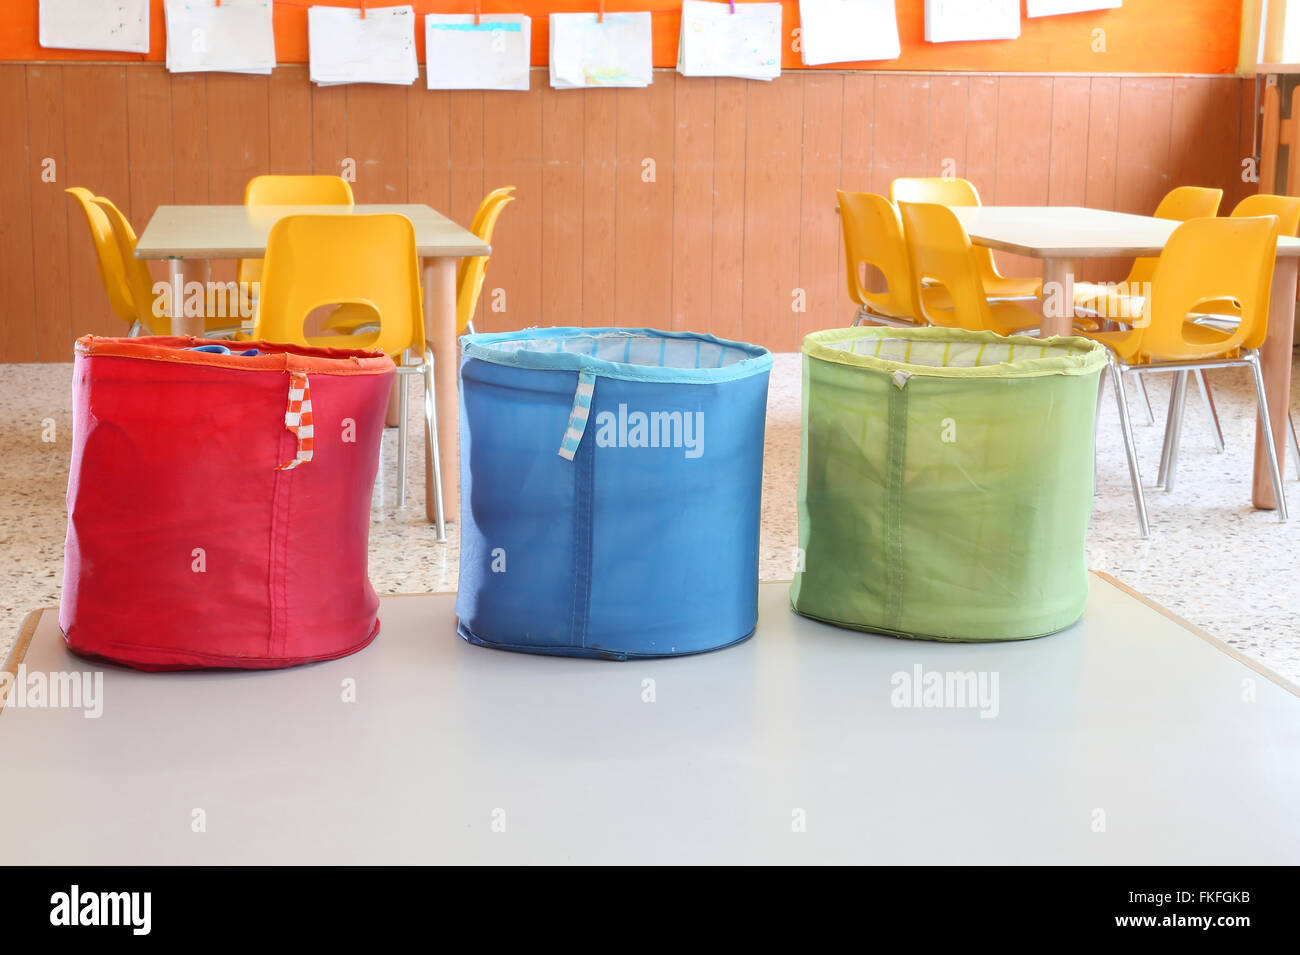 three colored jars for toys in kindergarten classroom Stock Photo